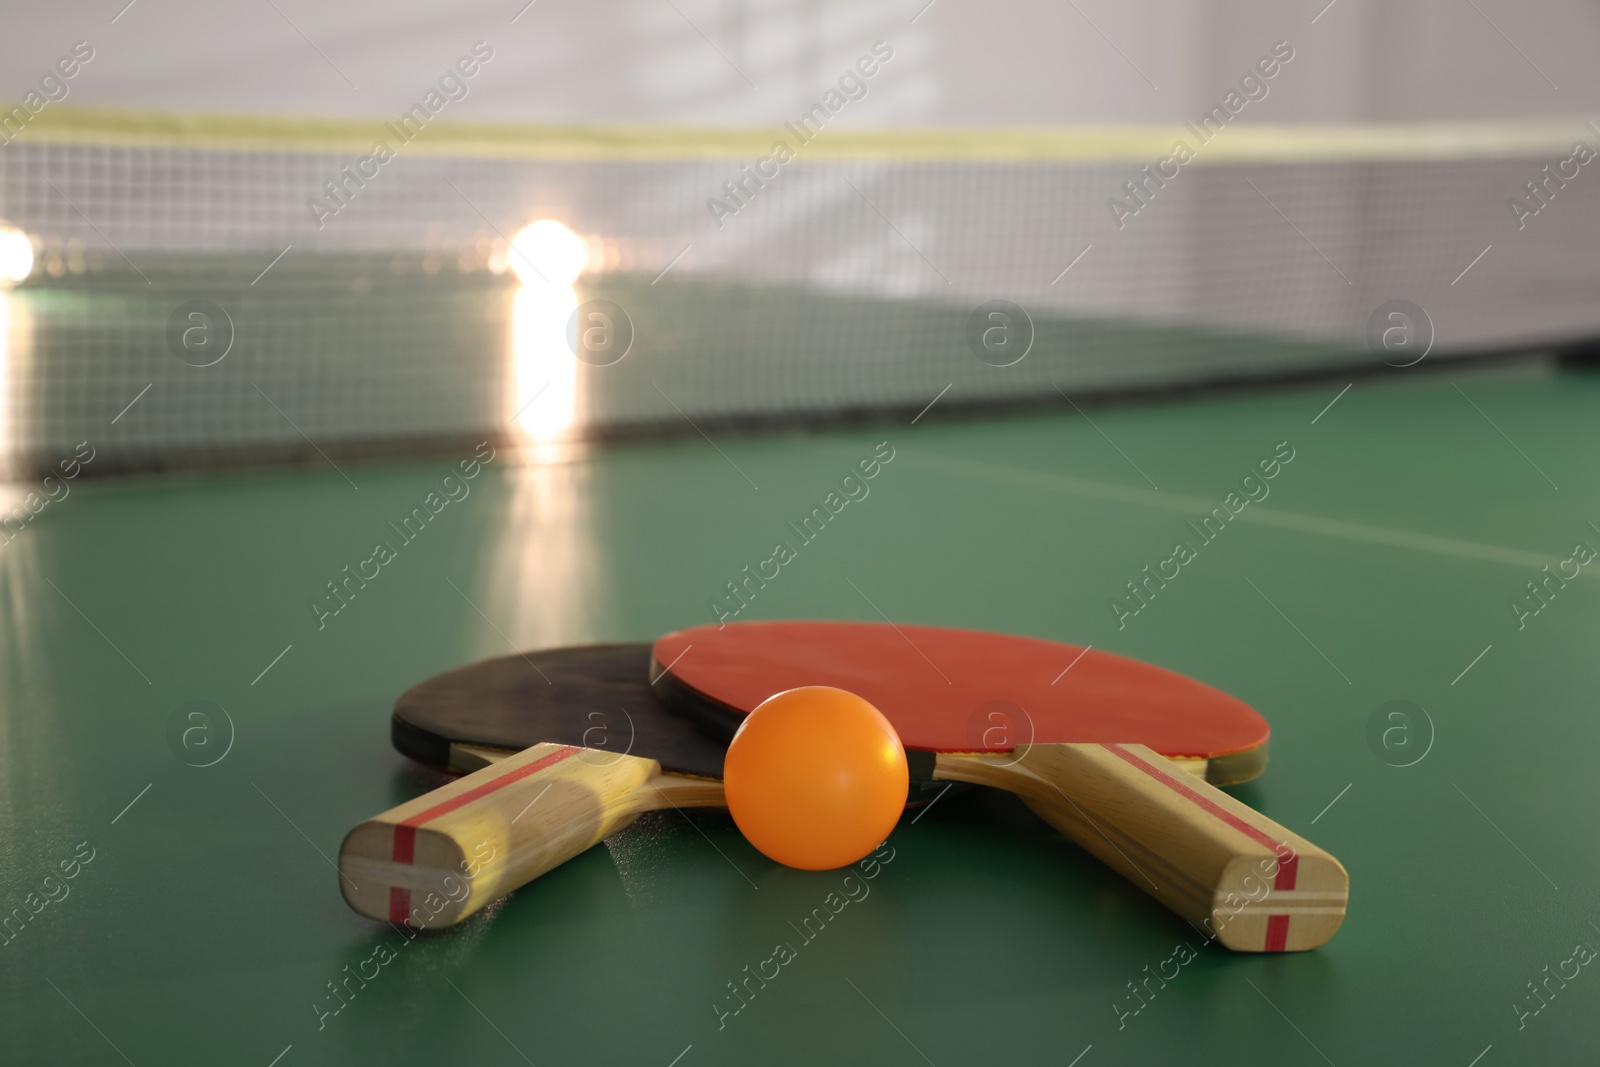 Photo of Rackets and ball on ping pong table, space for text